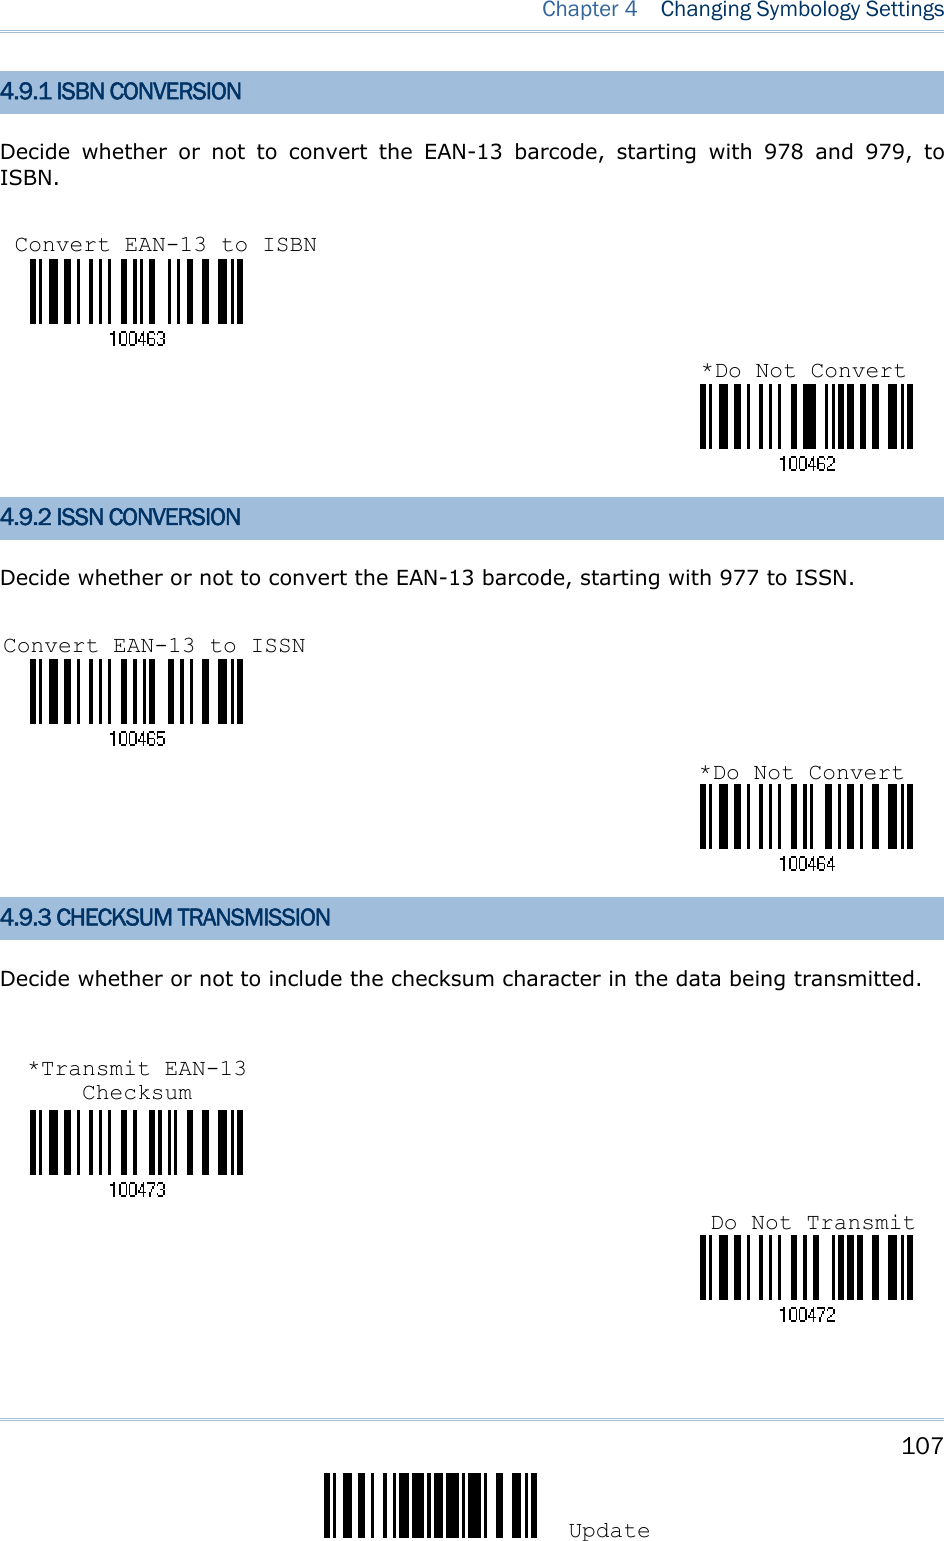     107 Update  Chapter 4   Changing Symbology Settings  4.9.1 ISBN CONVERSION Decide whether or not to convert the EAN-13 barcode, starting with 978 and 979, to ISBN.    4.9.2 ISSN CONVERSION Decide whether or not to convert the EAN-13 barcode, starting with 977 to ISSN.    4.9.3 CHECKSUM TRANSMISSION Decide whether or not to include the checksum character in the data being transmitted.       Convert EAN-13 to ISBN *Do Not Convert*Do Not ConvertConvert EAN-13 to ISSN Do Not Transmit*Transmit EAN-13 Checksum 